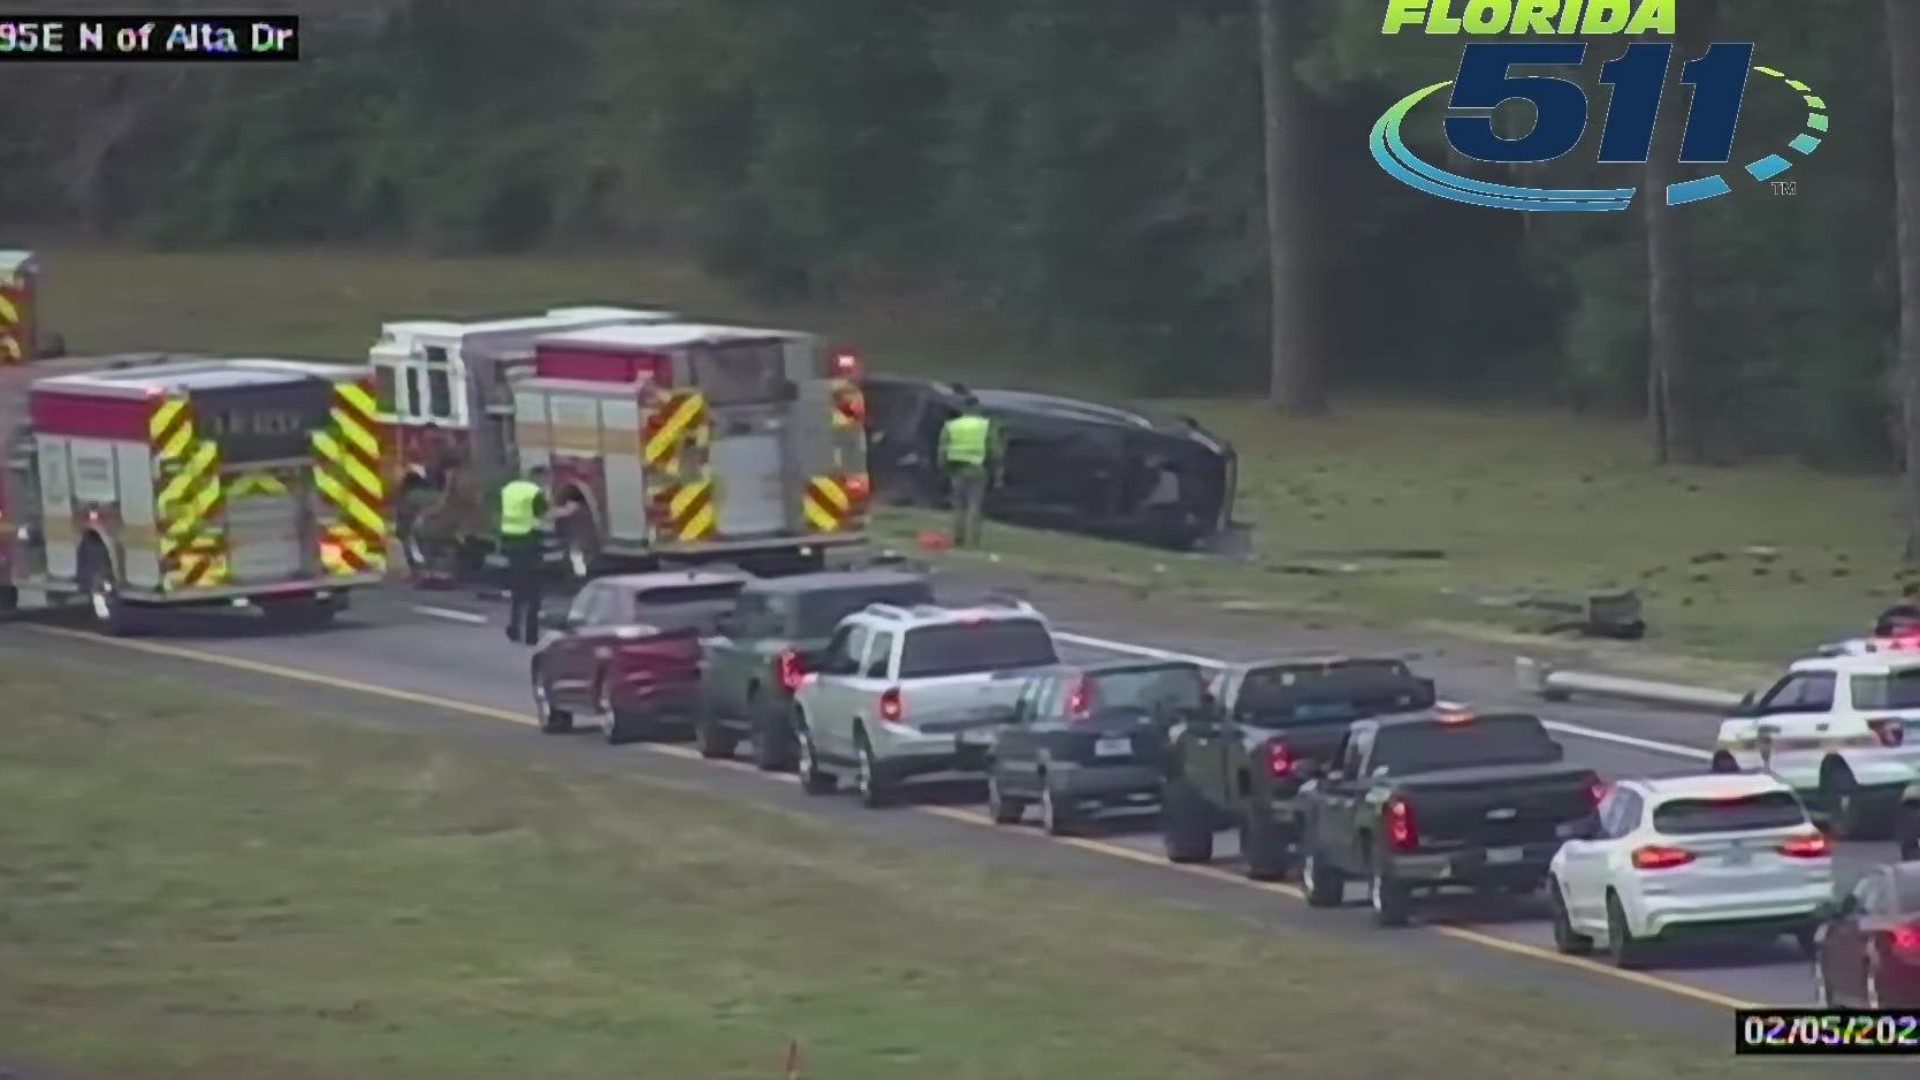 The car was overturned on I-295 Sunday. Police said the driver wasn't wearing a seatbelt.